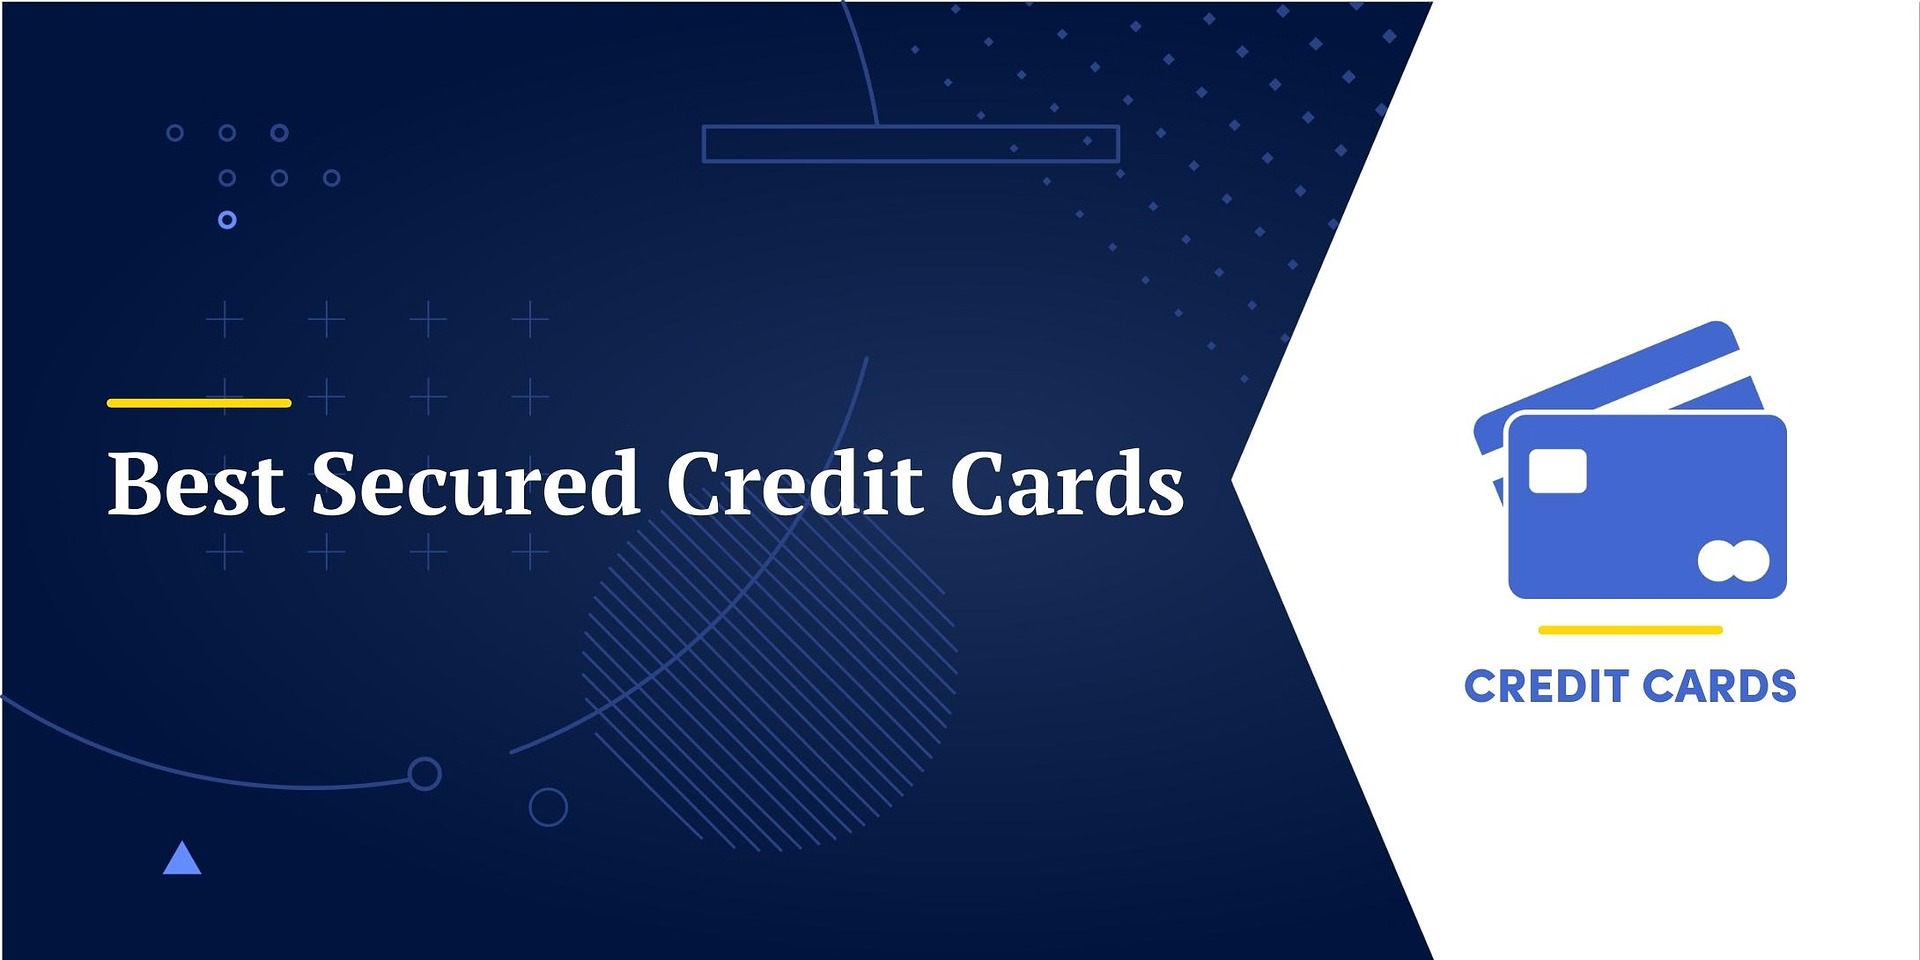 Which Is The Best Secured Card?